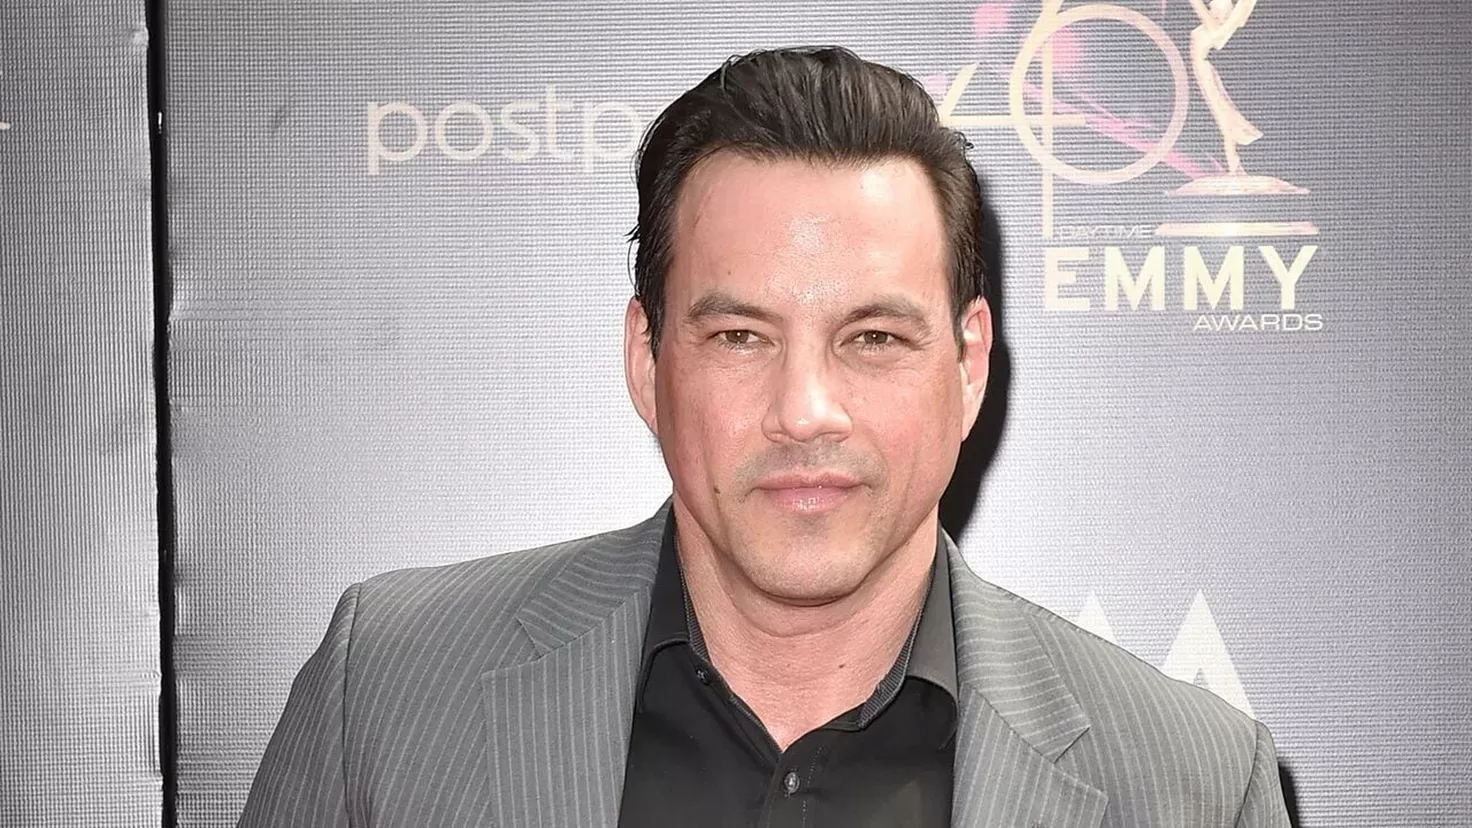 Asphyxiation due to poisoning: the cause of death of Tyler Christopher, from General Hospital
